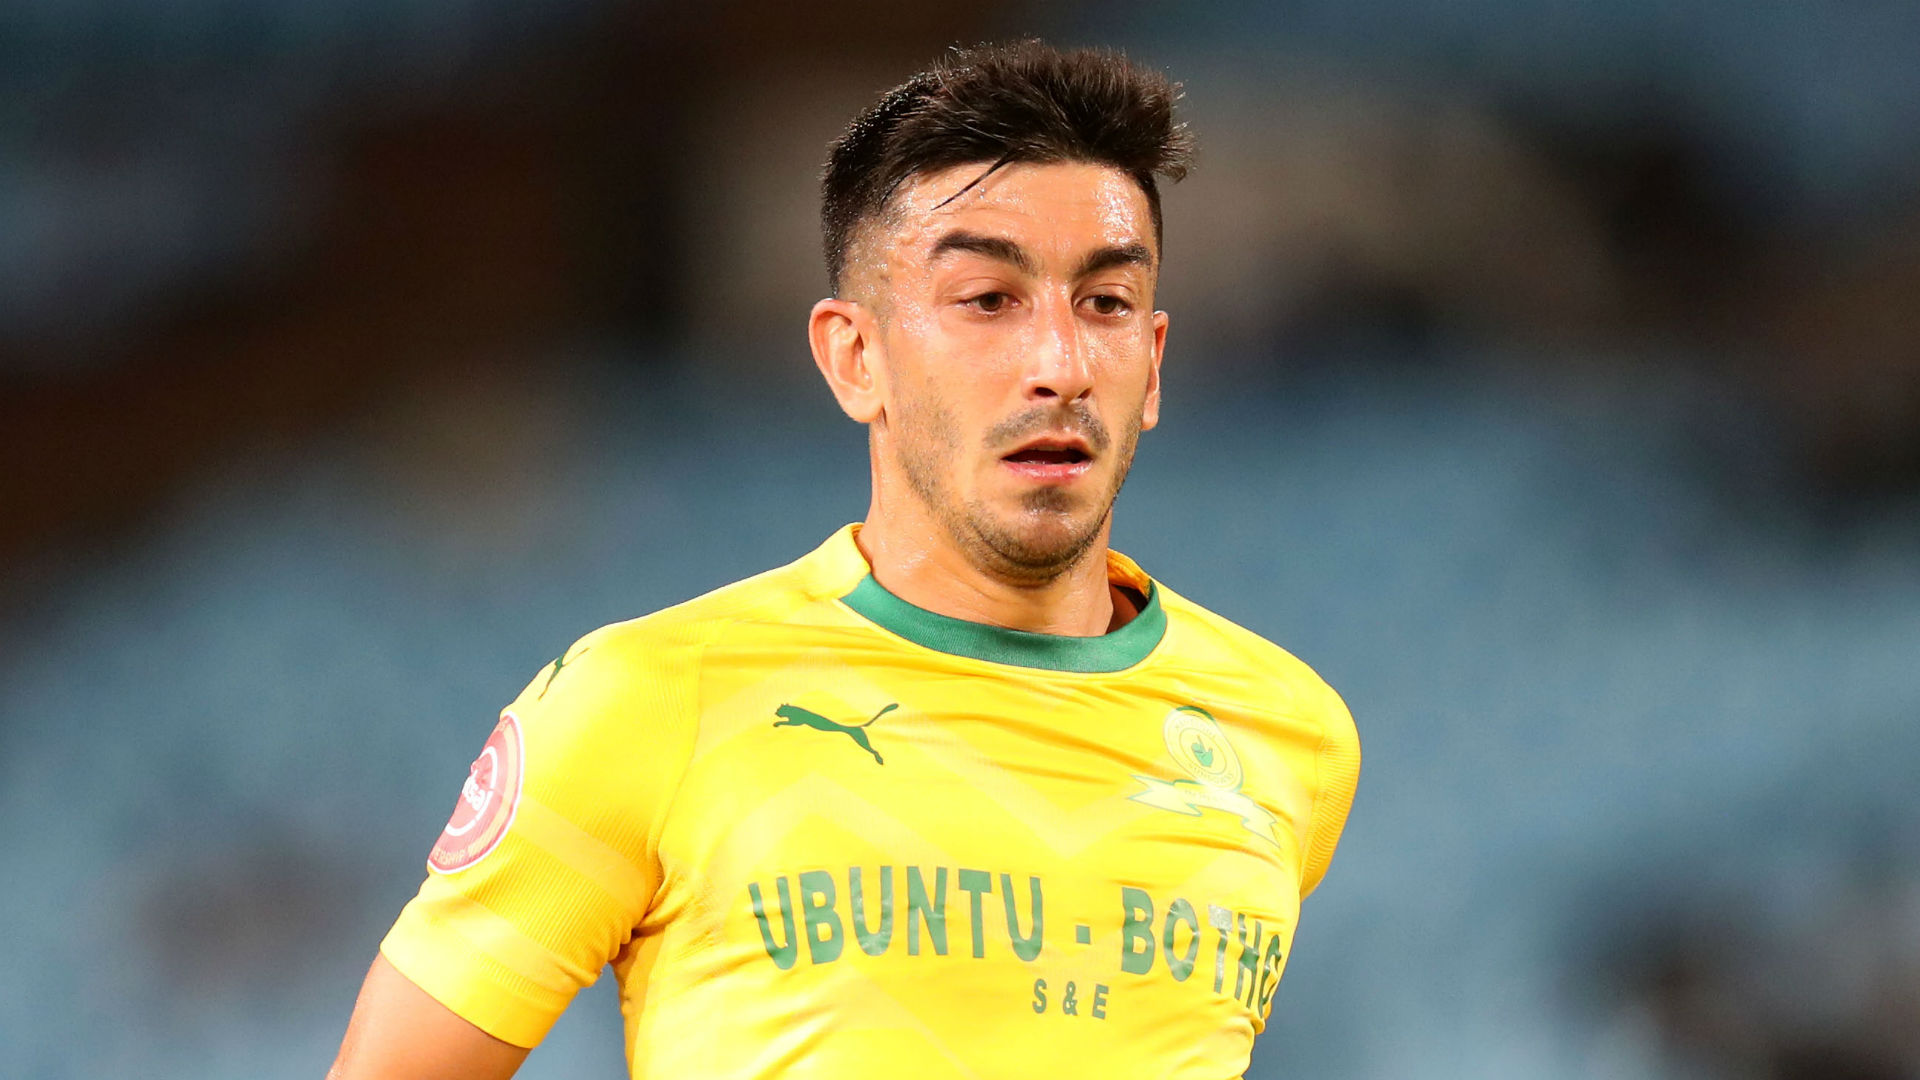 There's nothing sinister between Tade and Mamelodi Sundowns - Agent